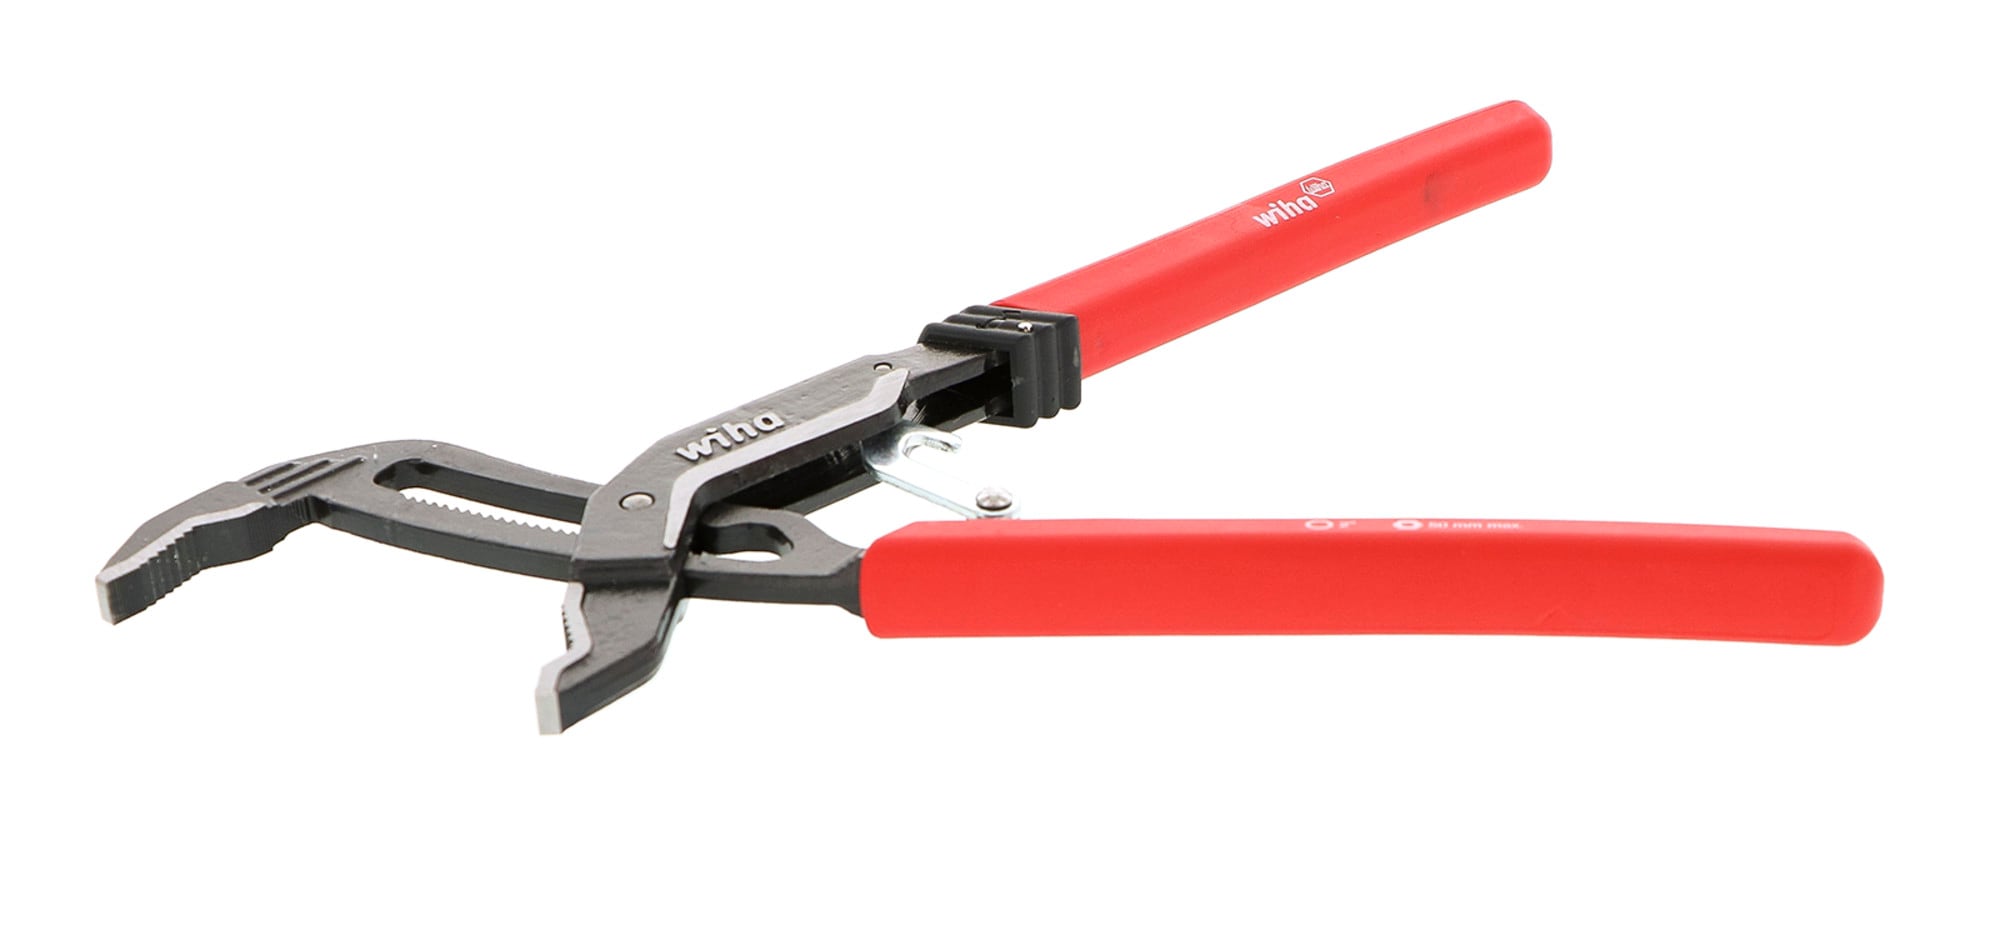 141 Light Wire Pliers with Step and 3 Grooves Online | Hunzadental